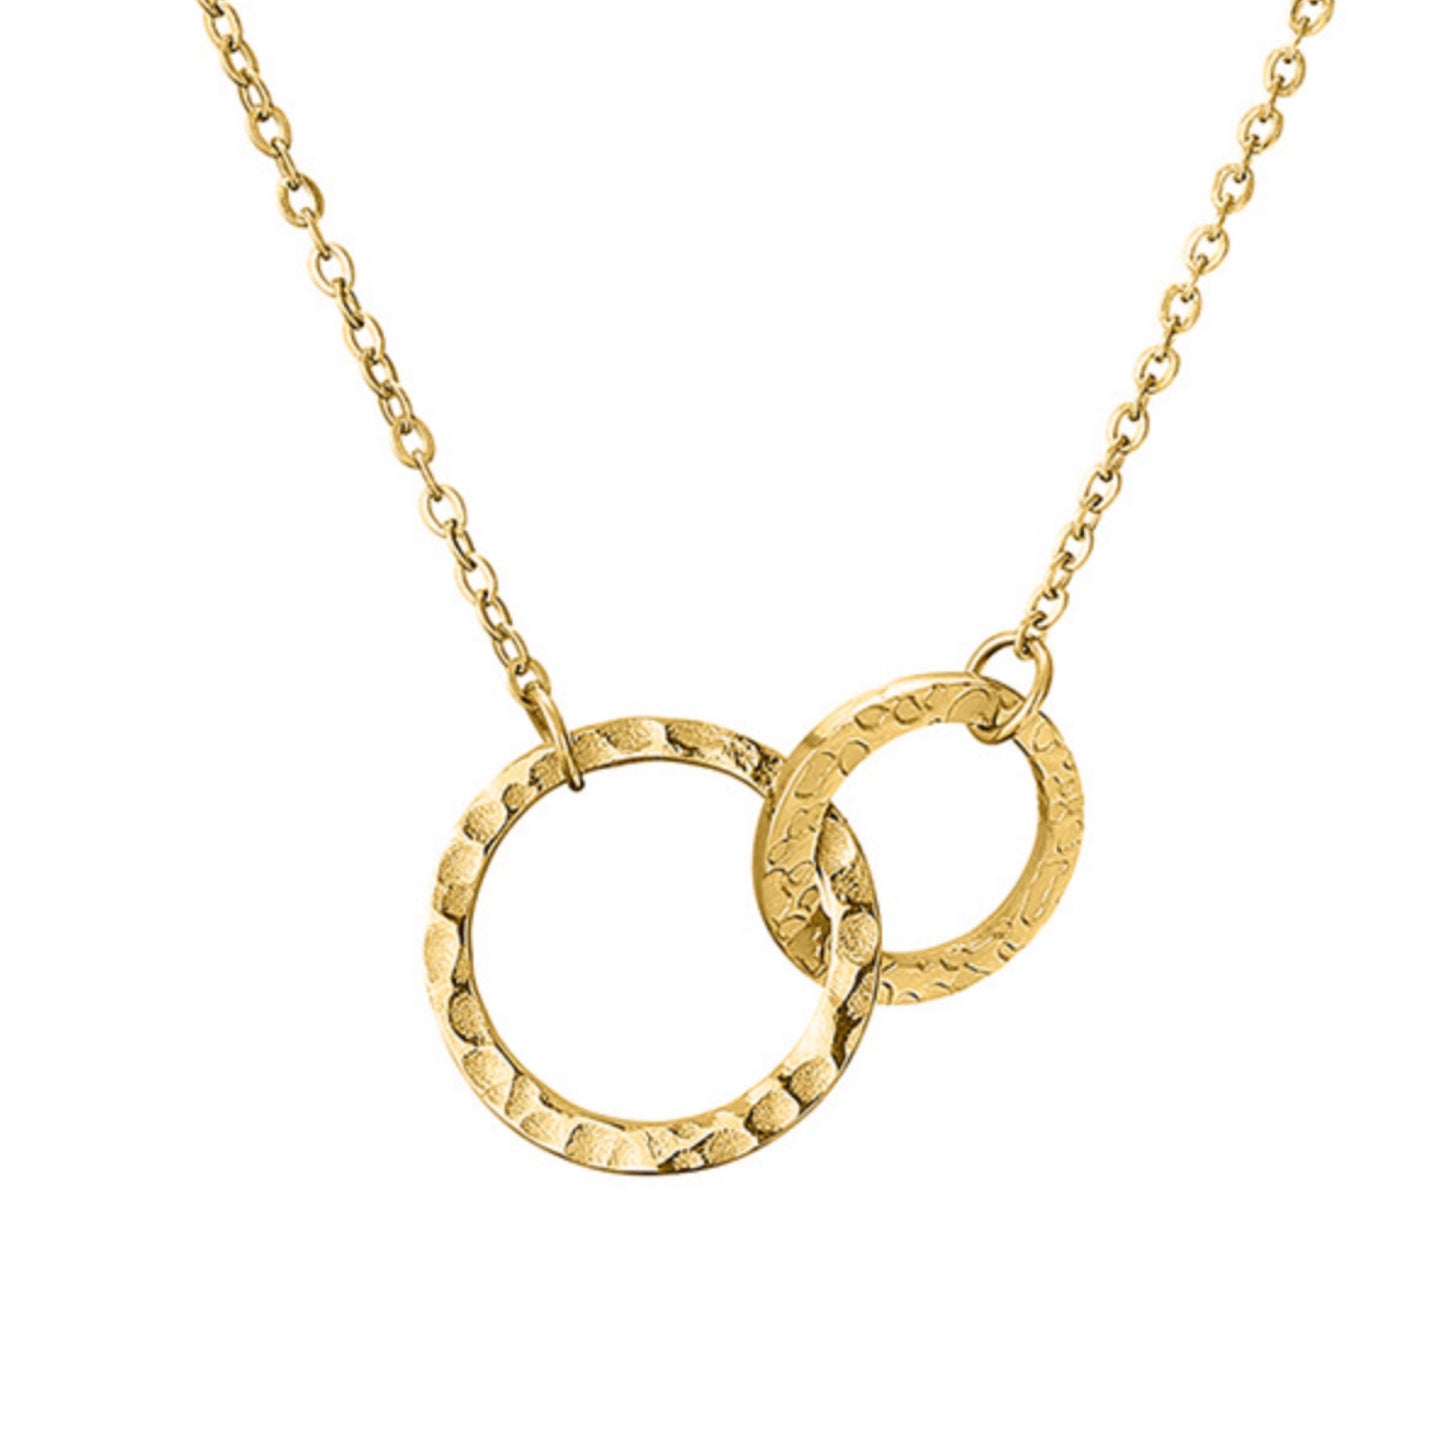 Hammered Double Ring Necklace